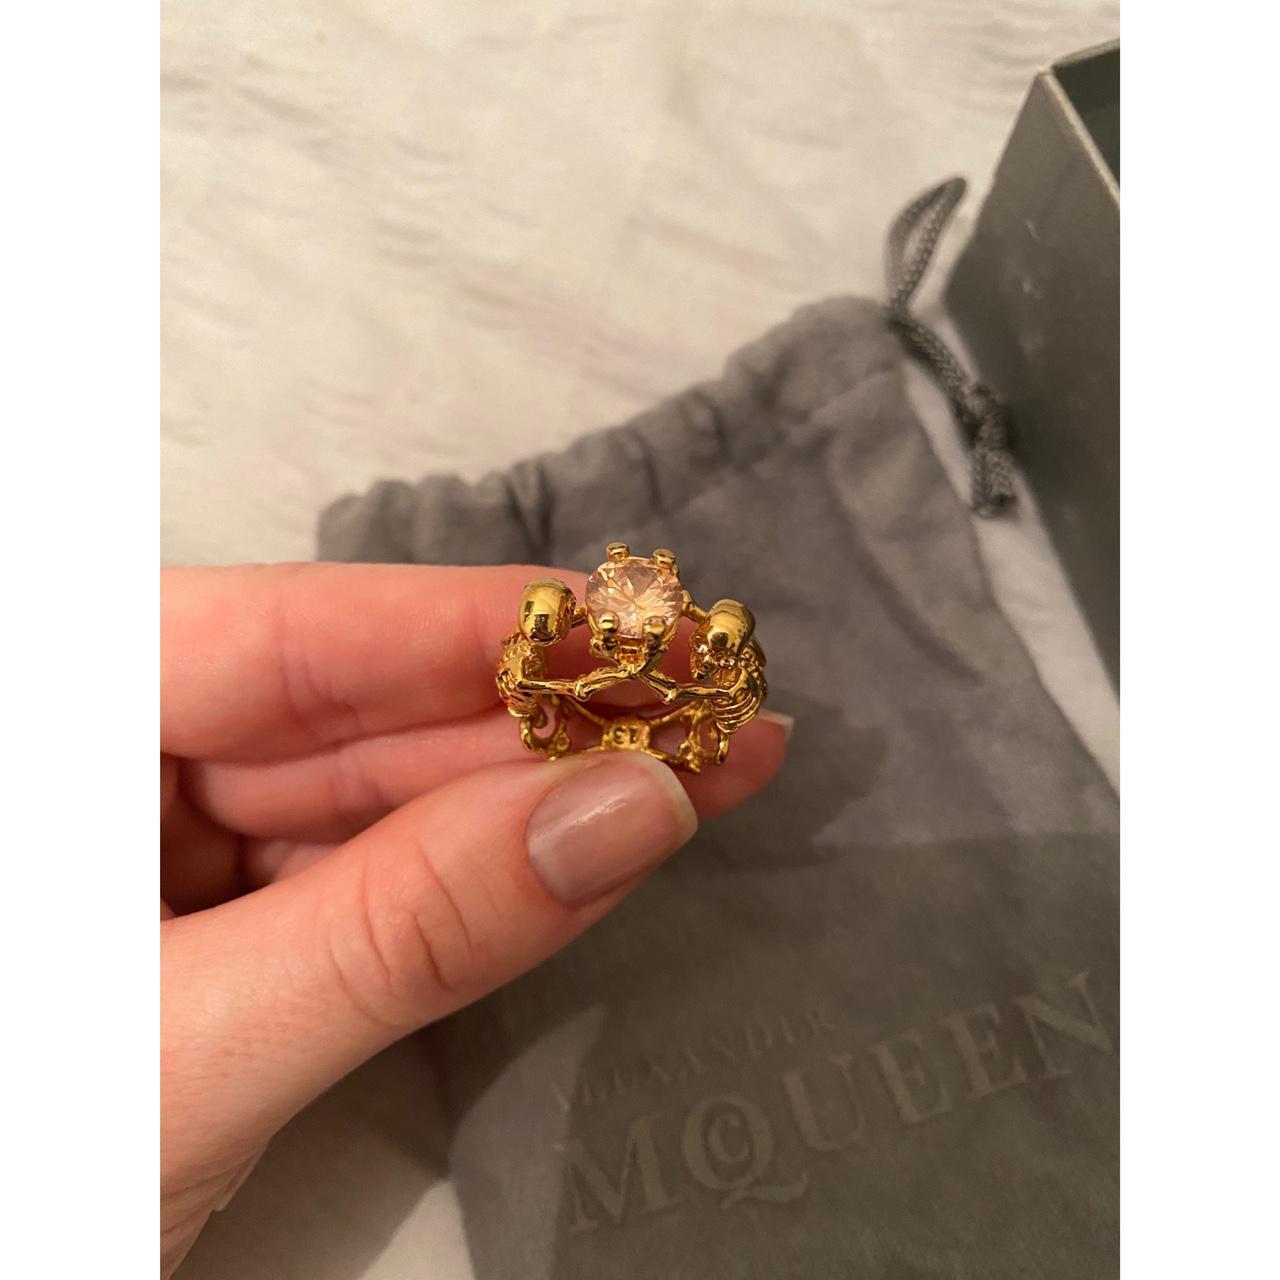 Product Image 2 - Alexander McQueen Gold ring
Size 13
Worn